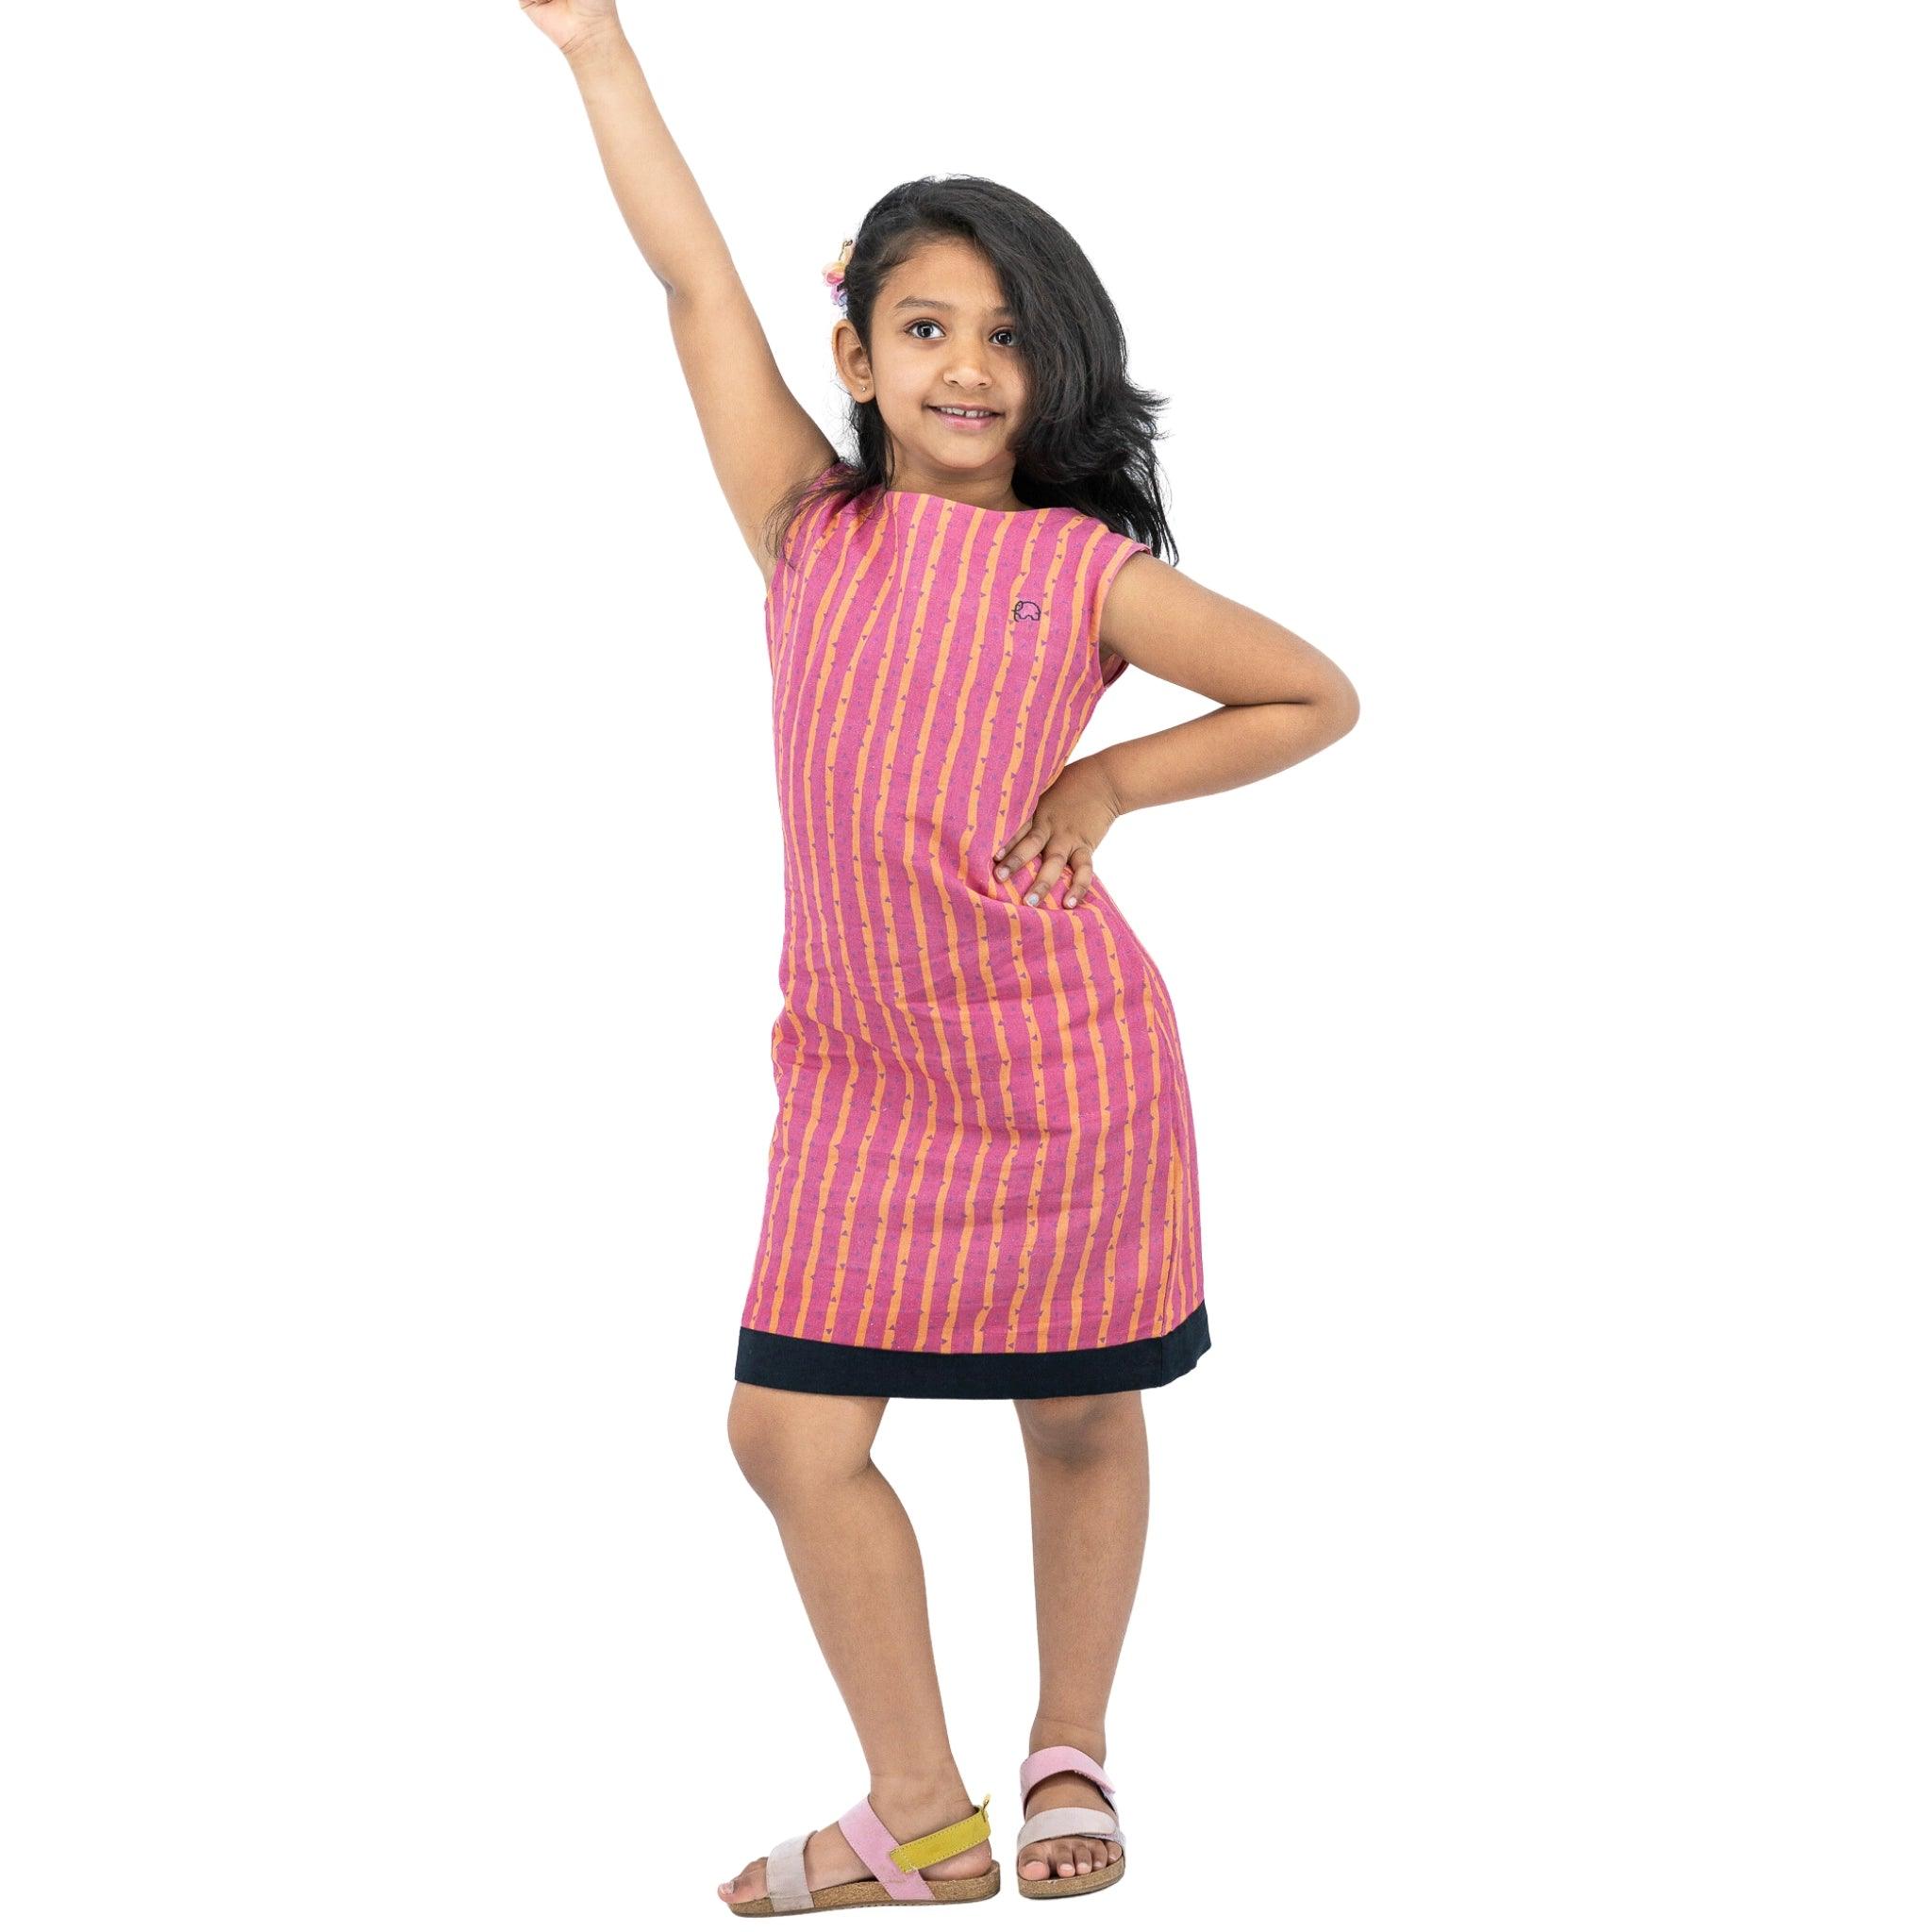 A girl in a Karee Linen Cotton Round Neck Frock for Kids in Lilac Rose with black stripes and her arm raised.